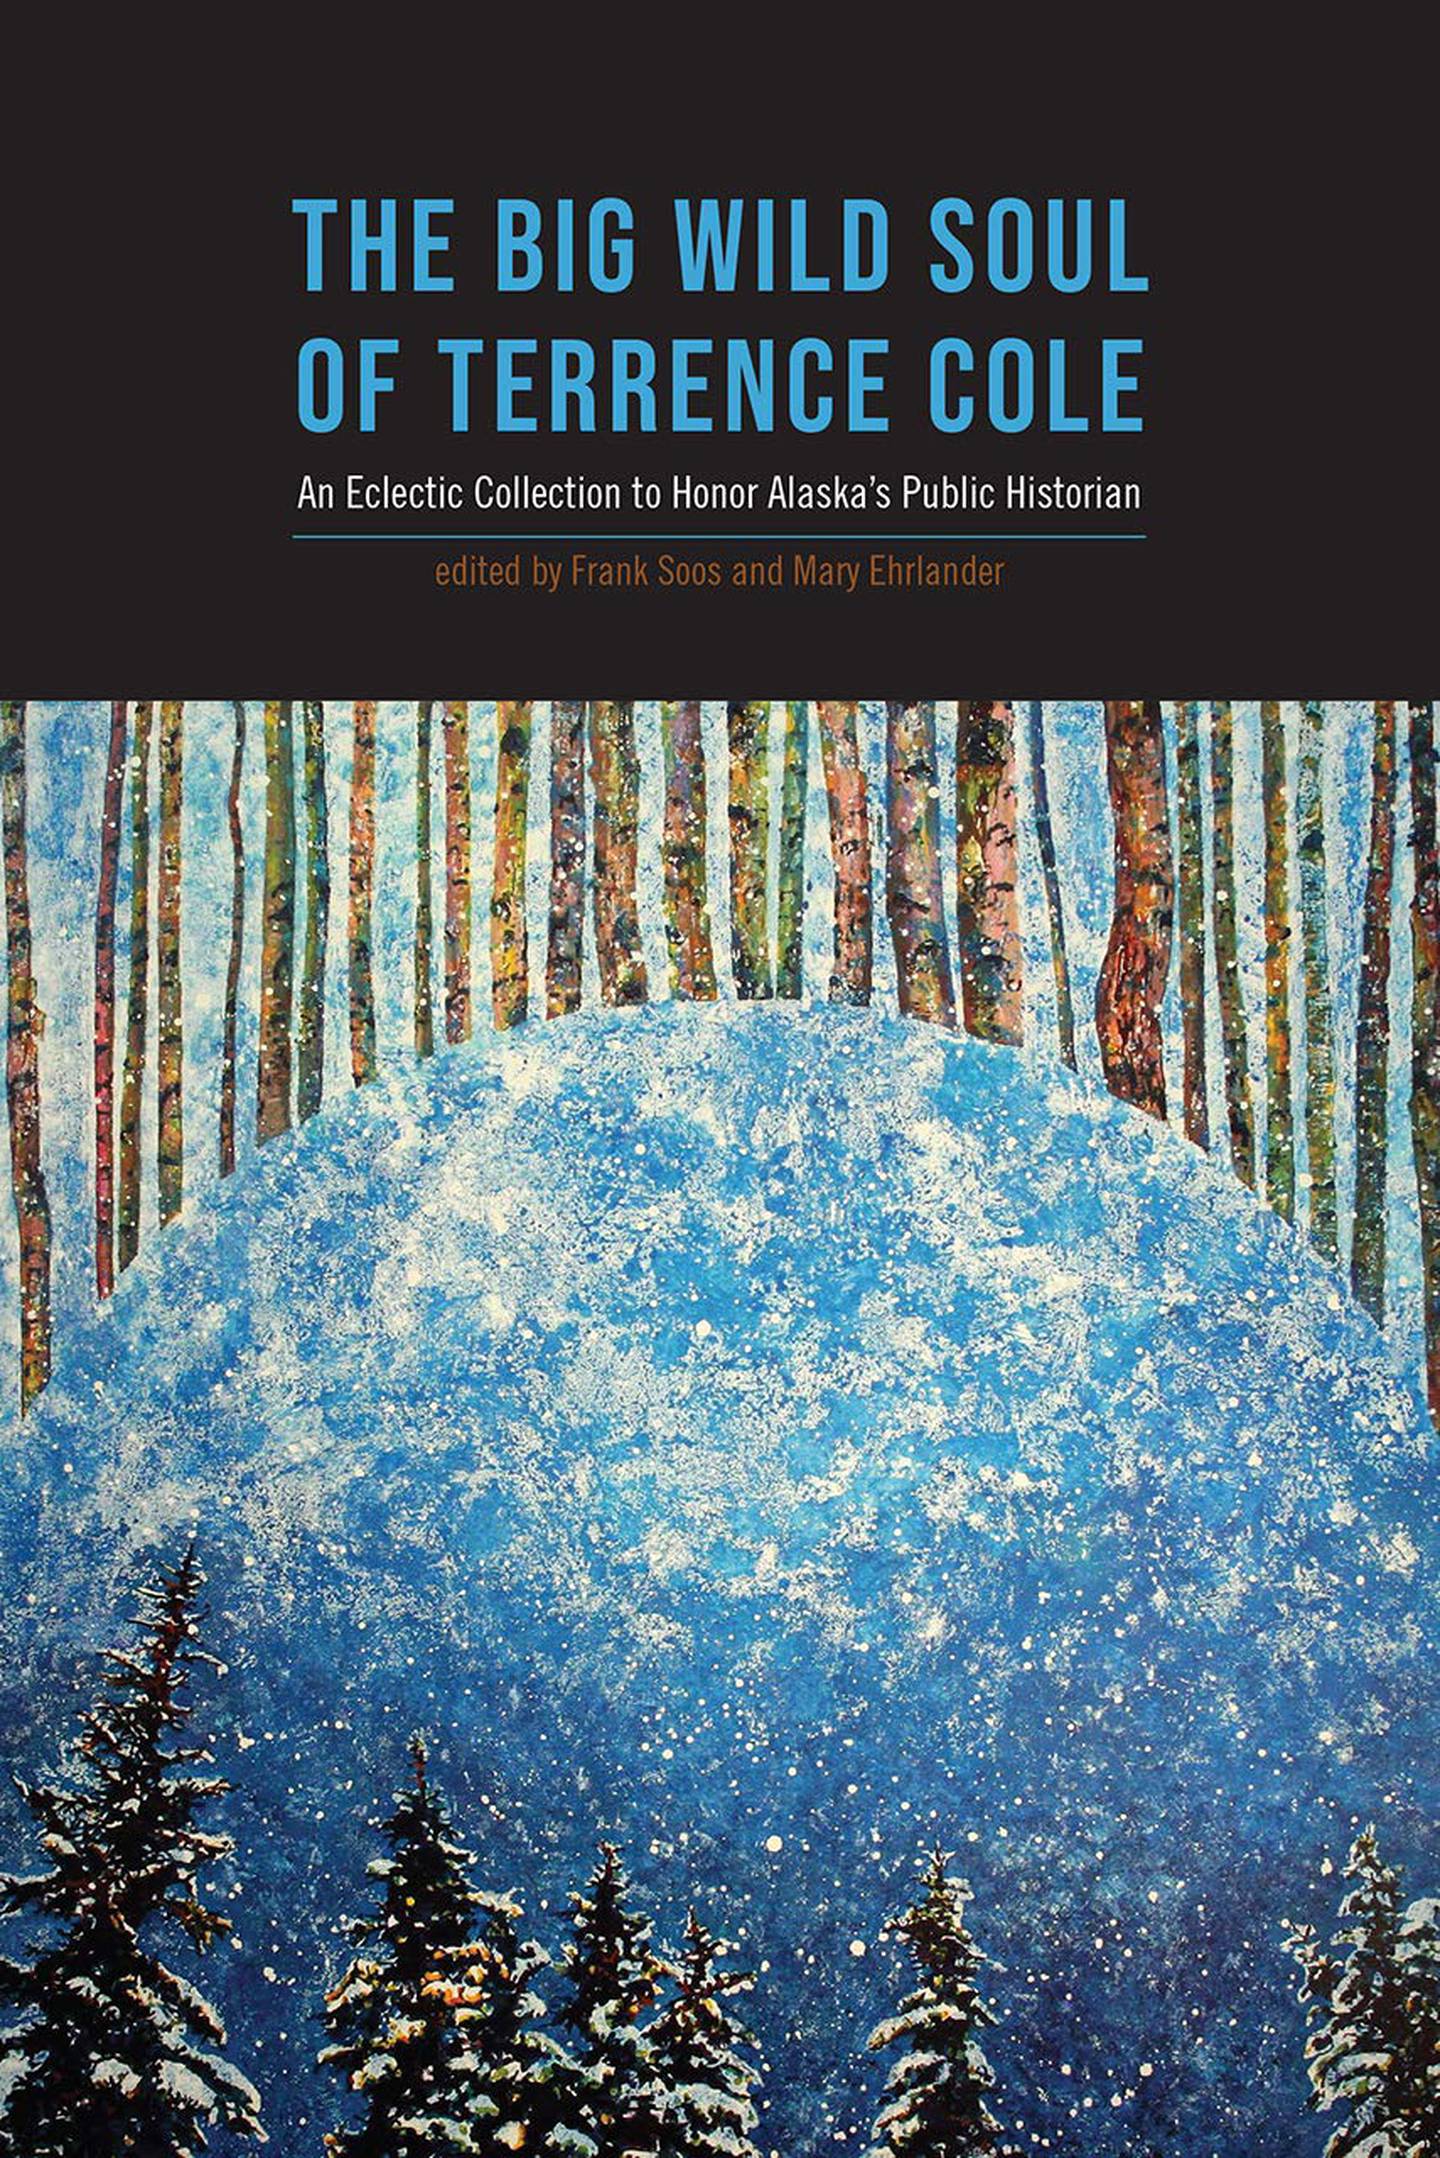 The Big Wild Soul of Terrence Cole: An Eclectic Collection to Honor Alaska’s Public Historian